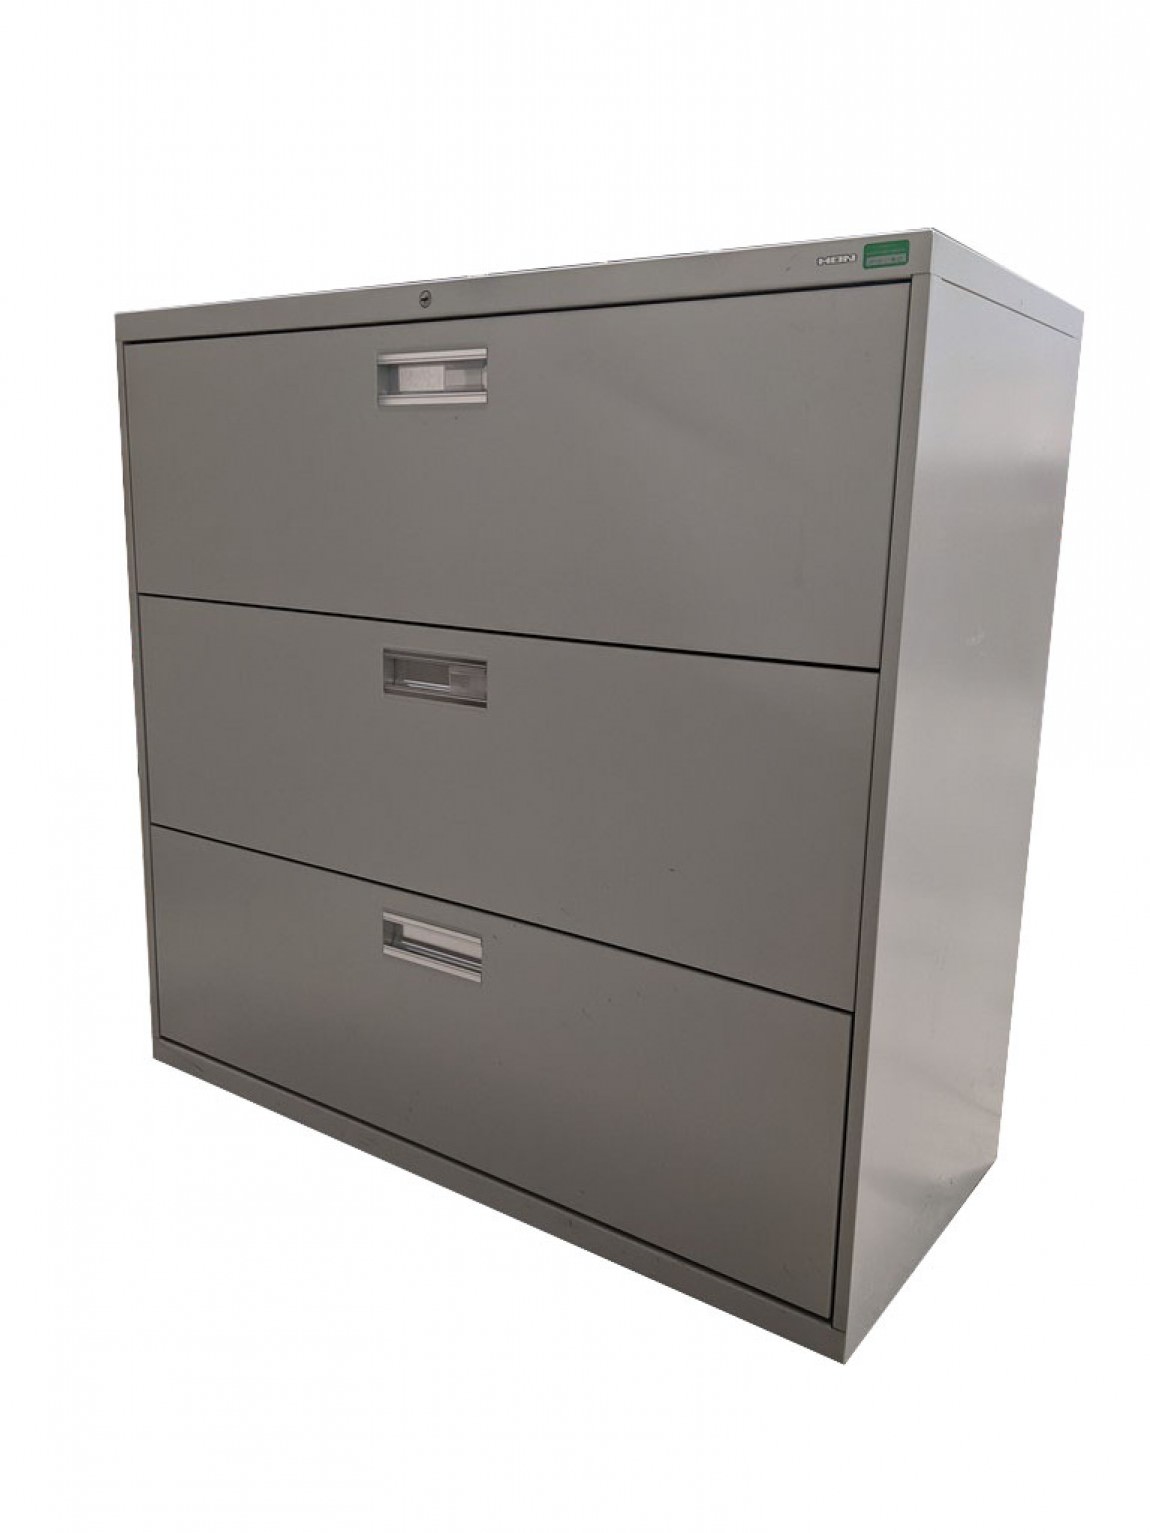 hon lateral file cabinet drawer removal